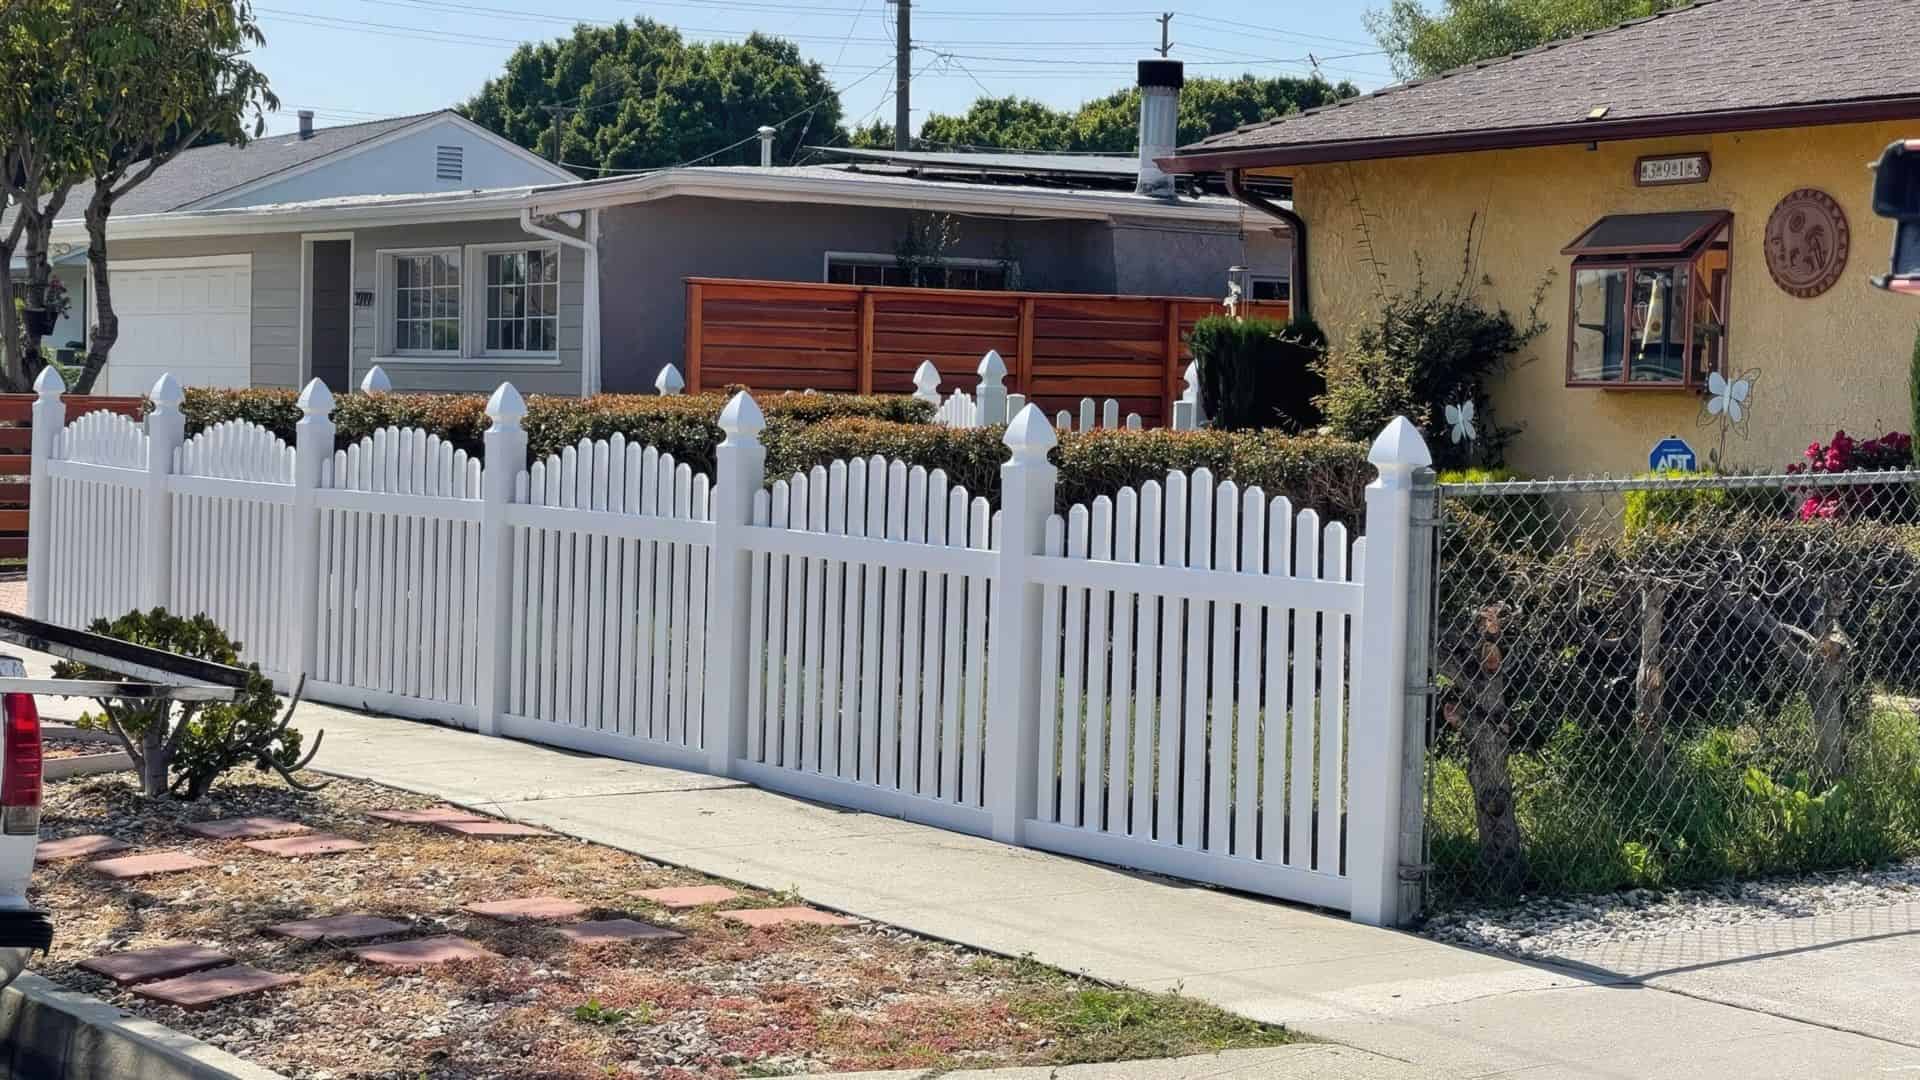 Vinyl arched picket fence & brick driveway beside a small garden & concrete sidewalk. Charming houses in the background.